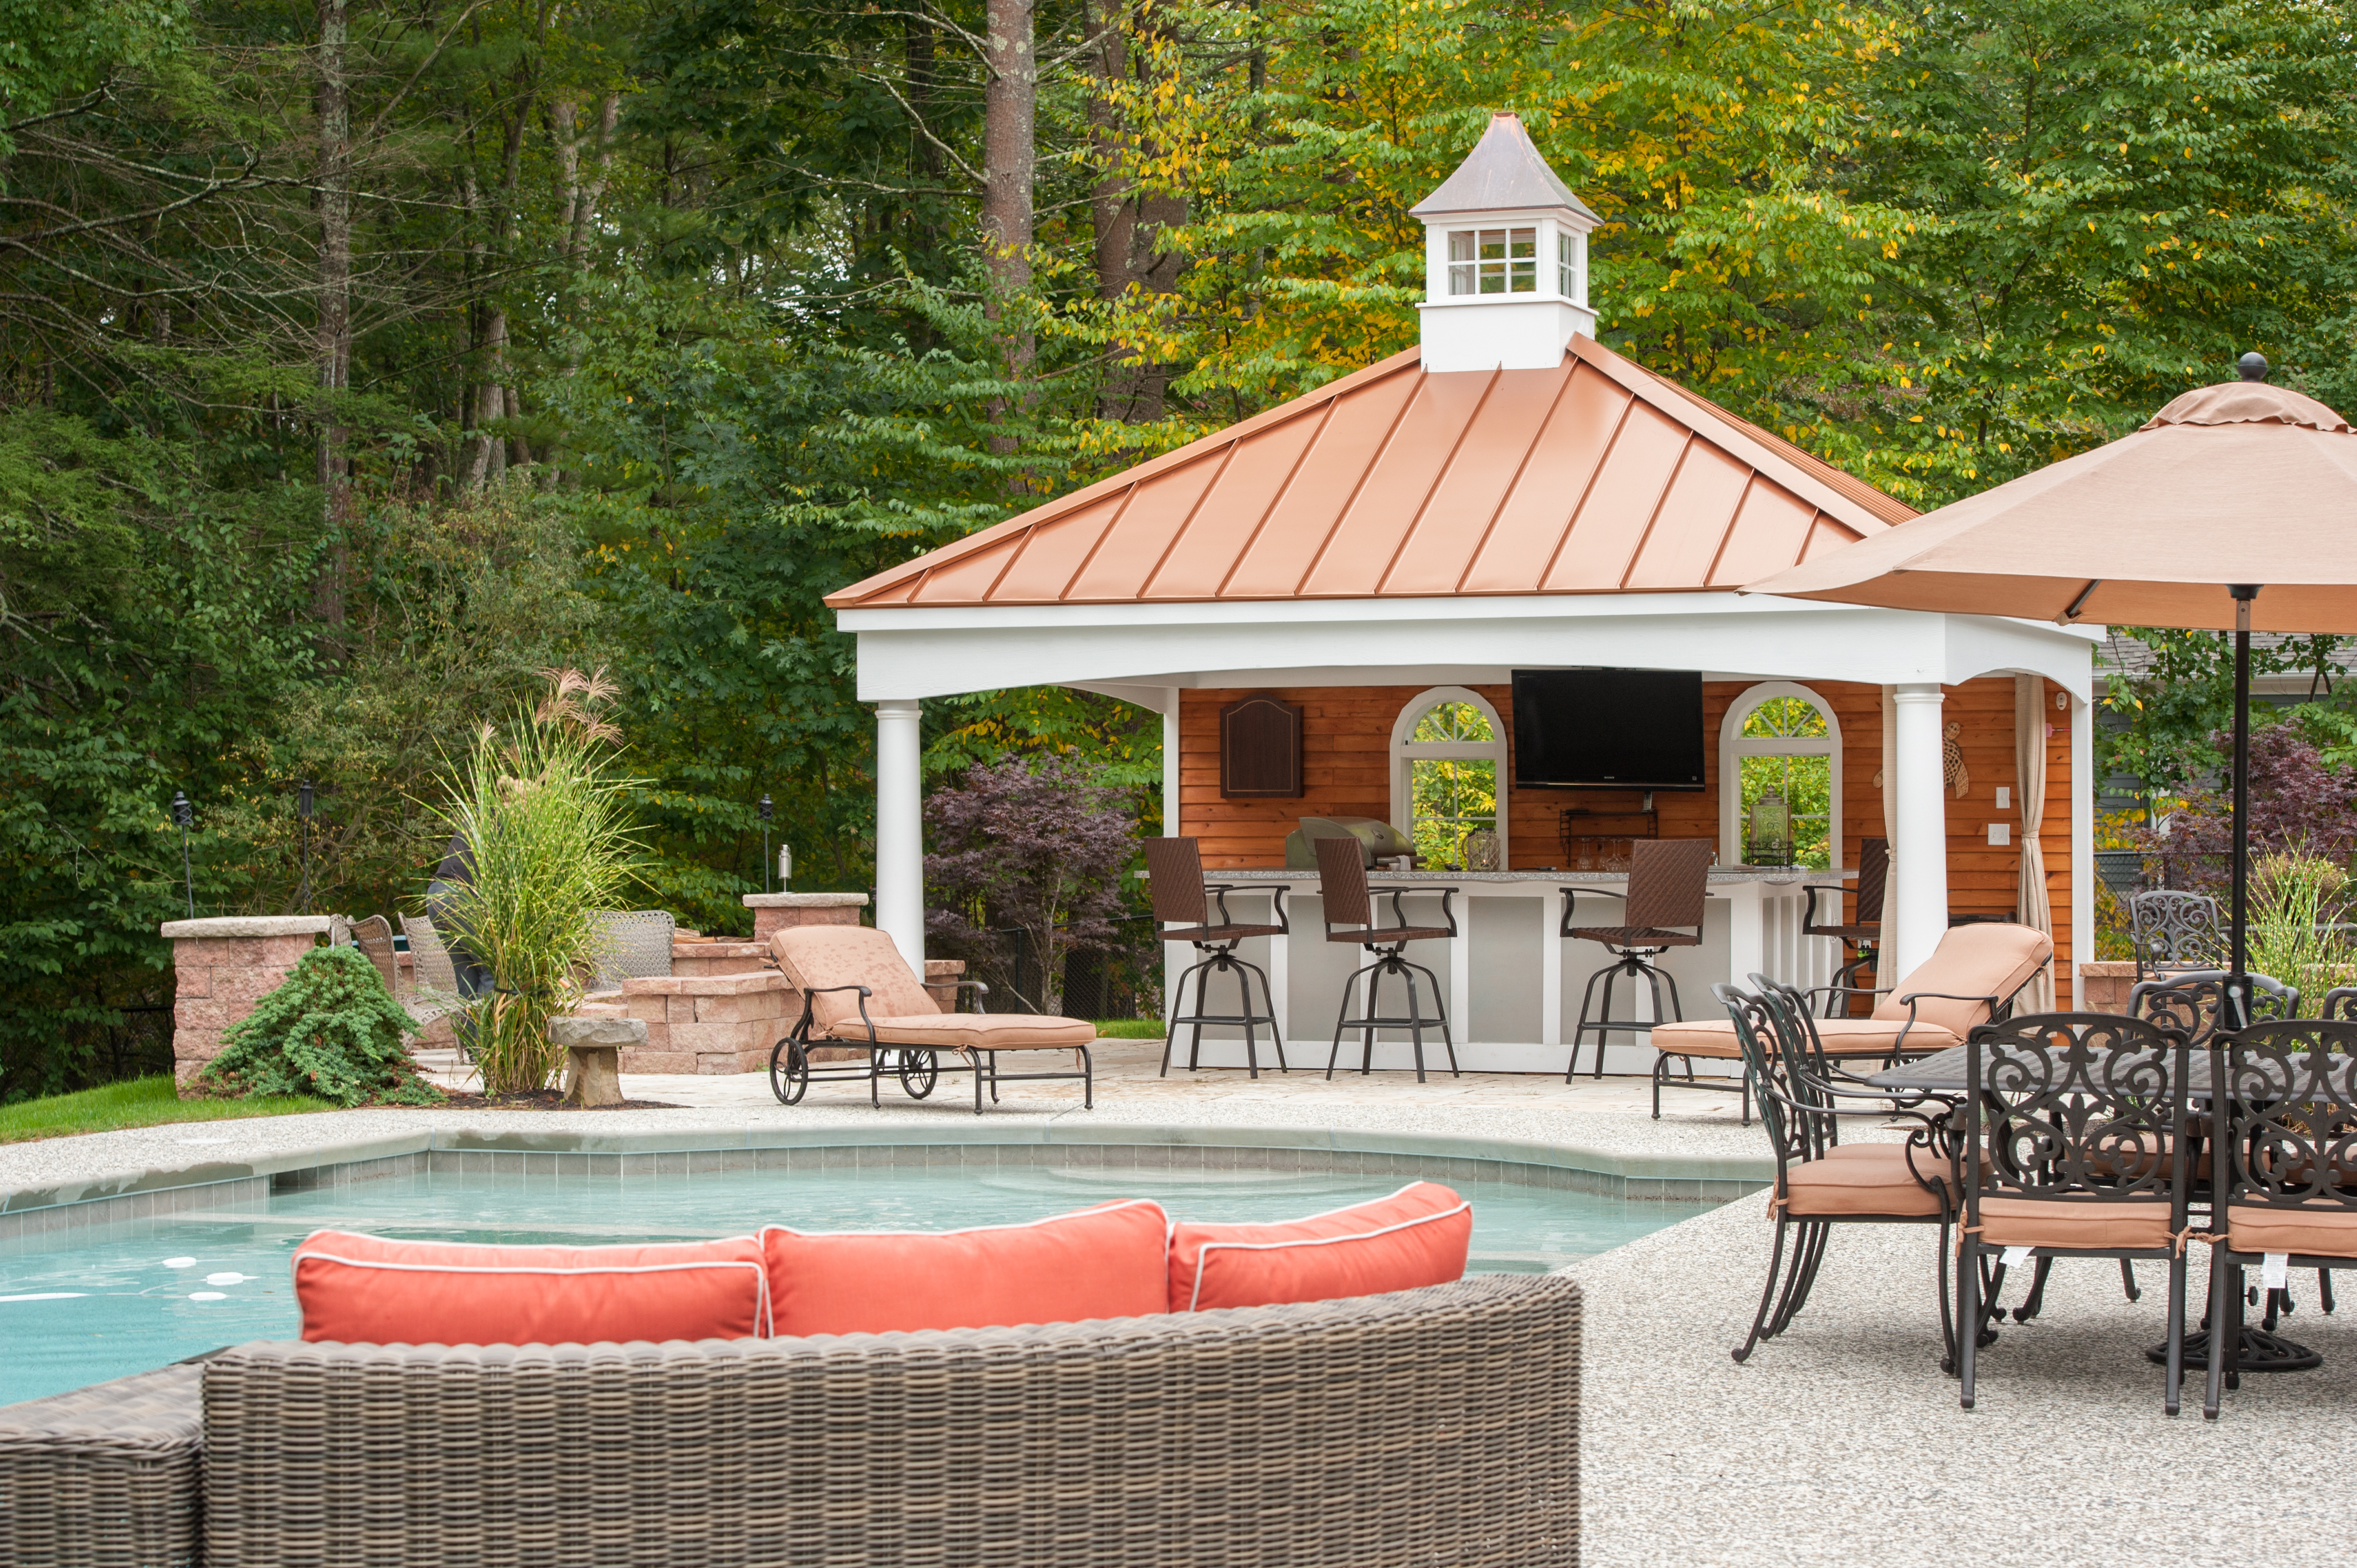 Pool Houses for Sale - PA, NJ, NY - Free Quote Homestead 